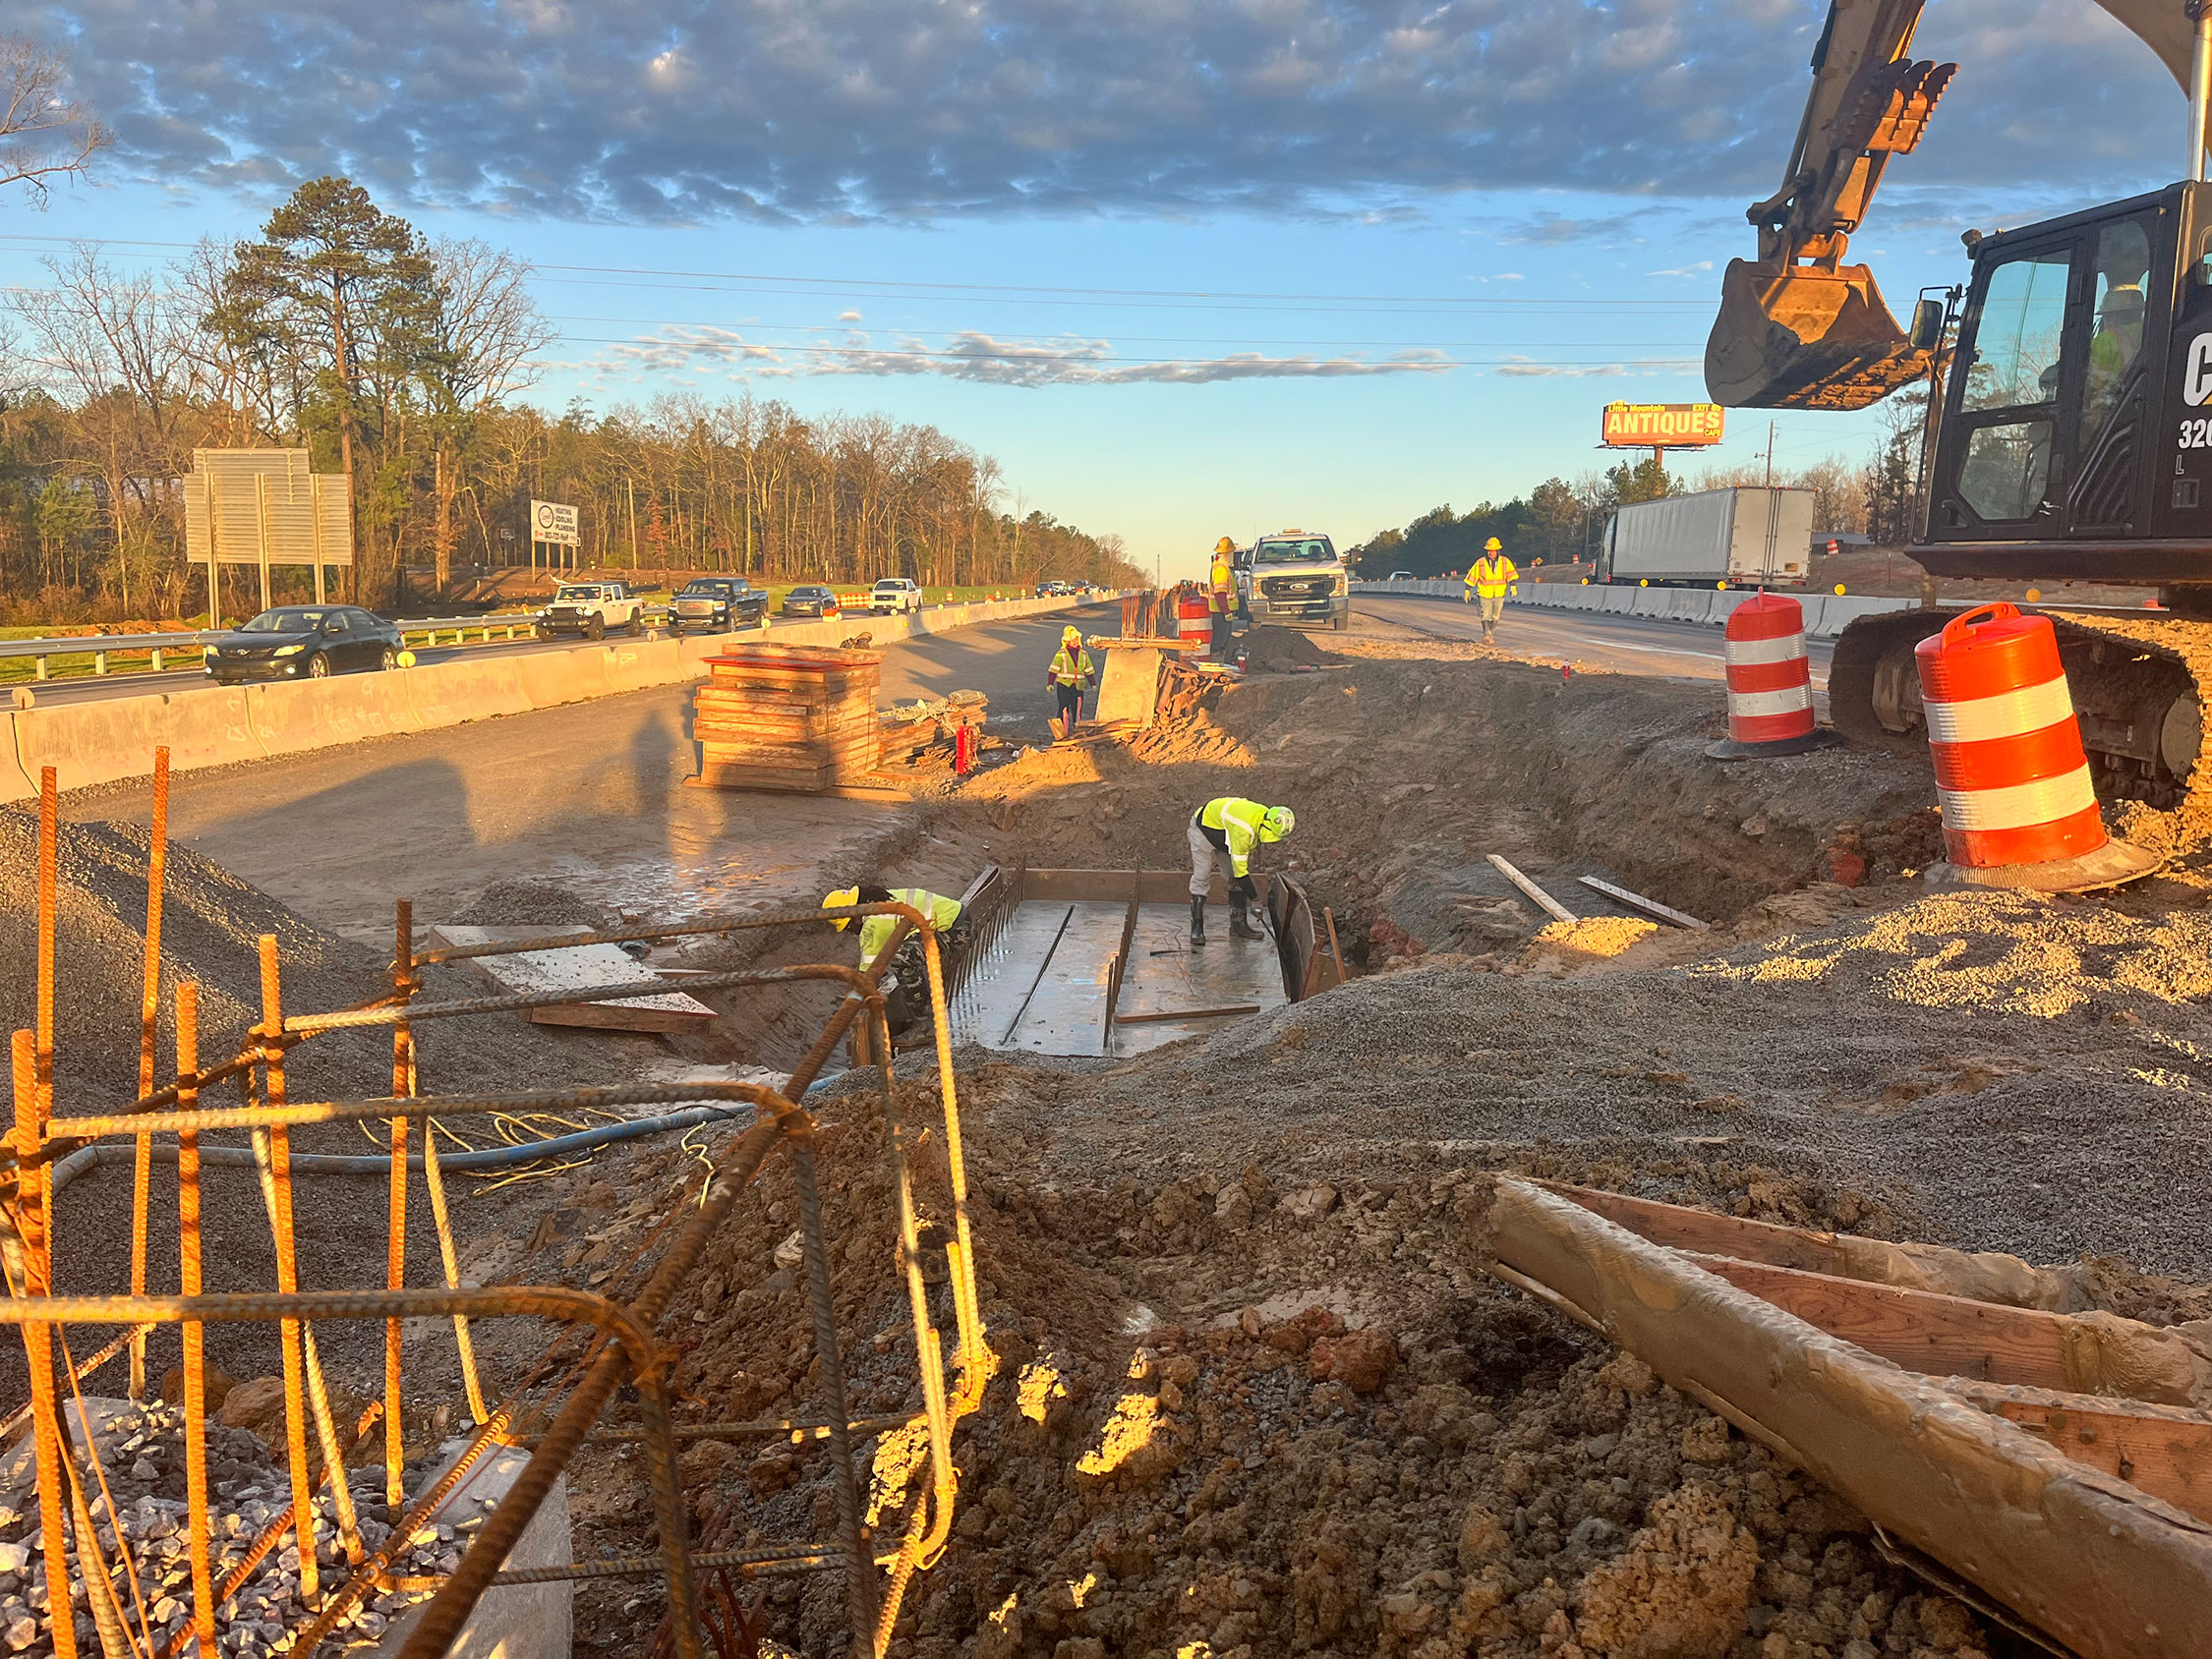 Crews in Segment 1 are removing the formwork for a concrete footing that will be the base for a future overhead sign structure.  Planning and coordination are key elements in highway construction.